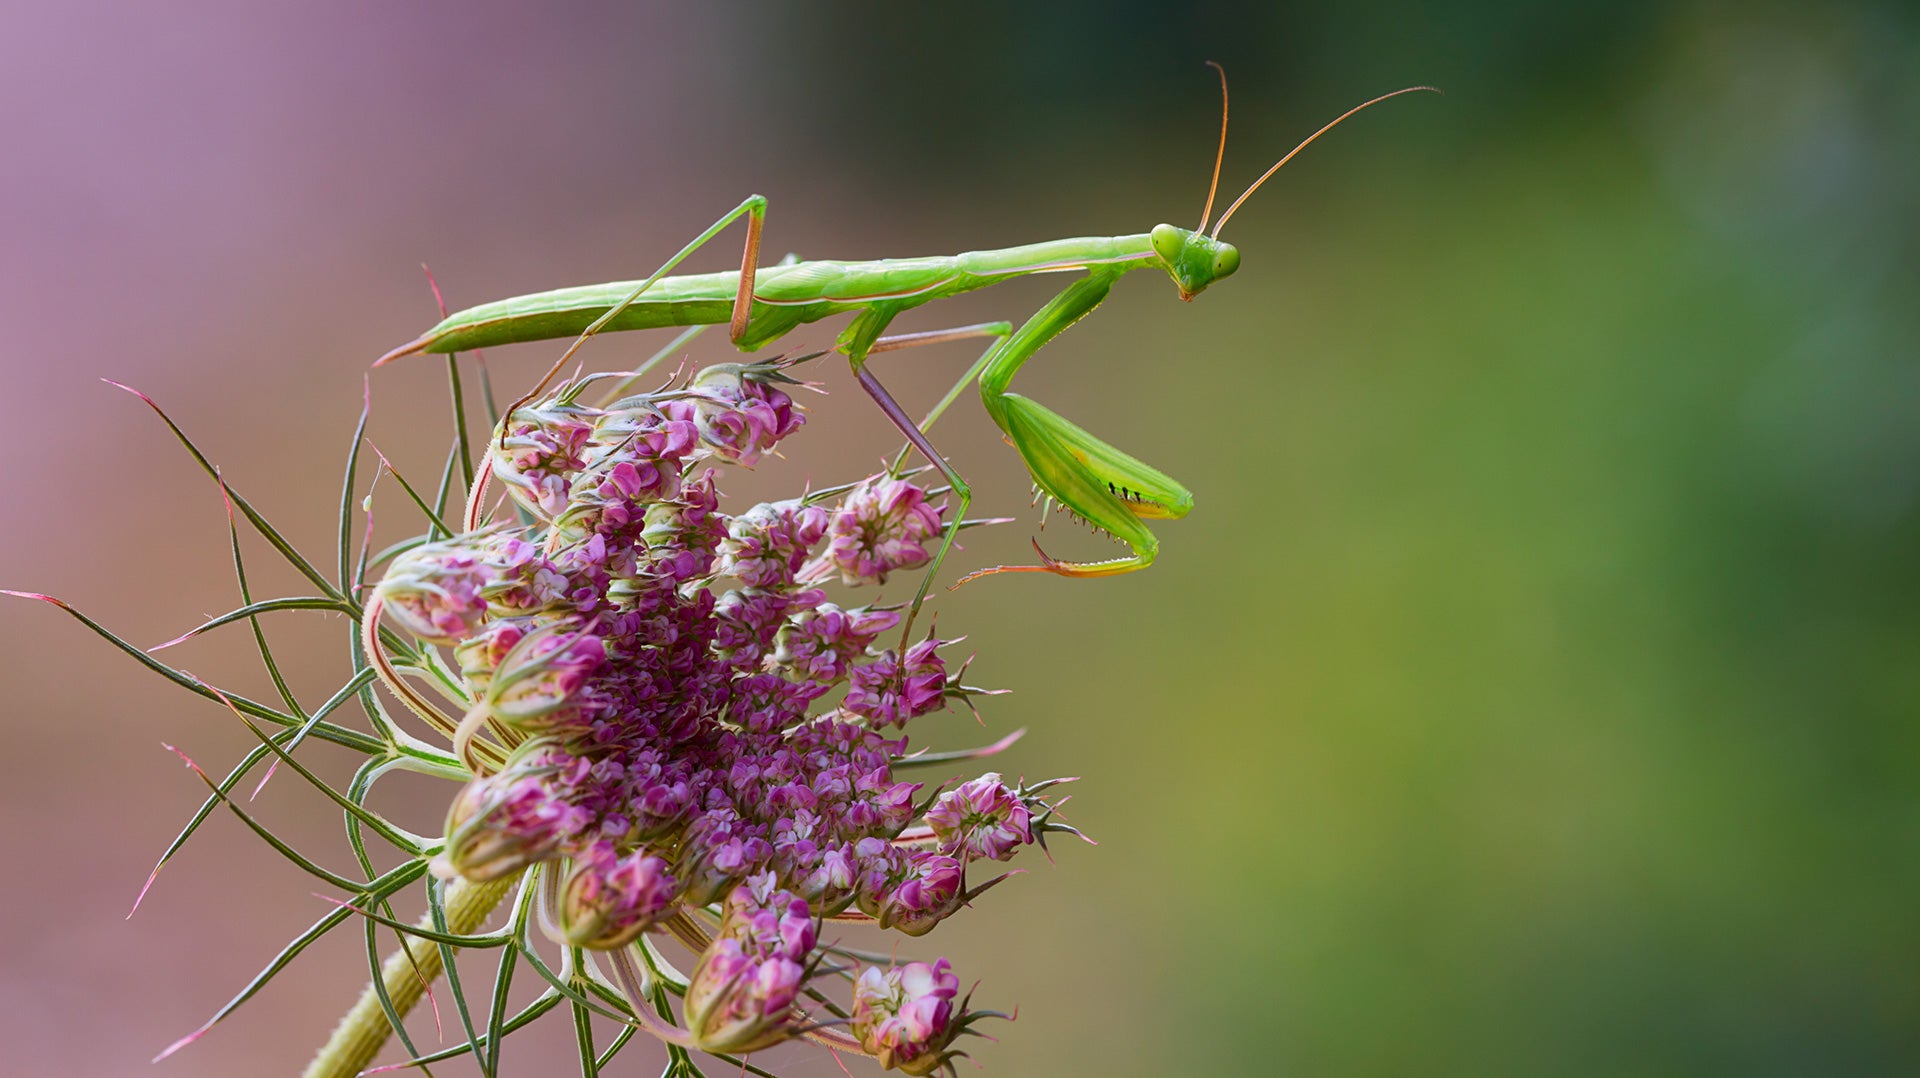 HOW TO ATTRACT PRAYING MANTISES TO YOUR GARDEN?